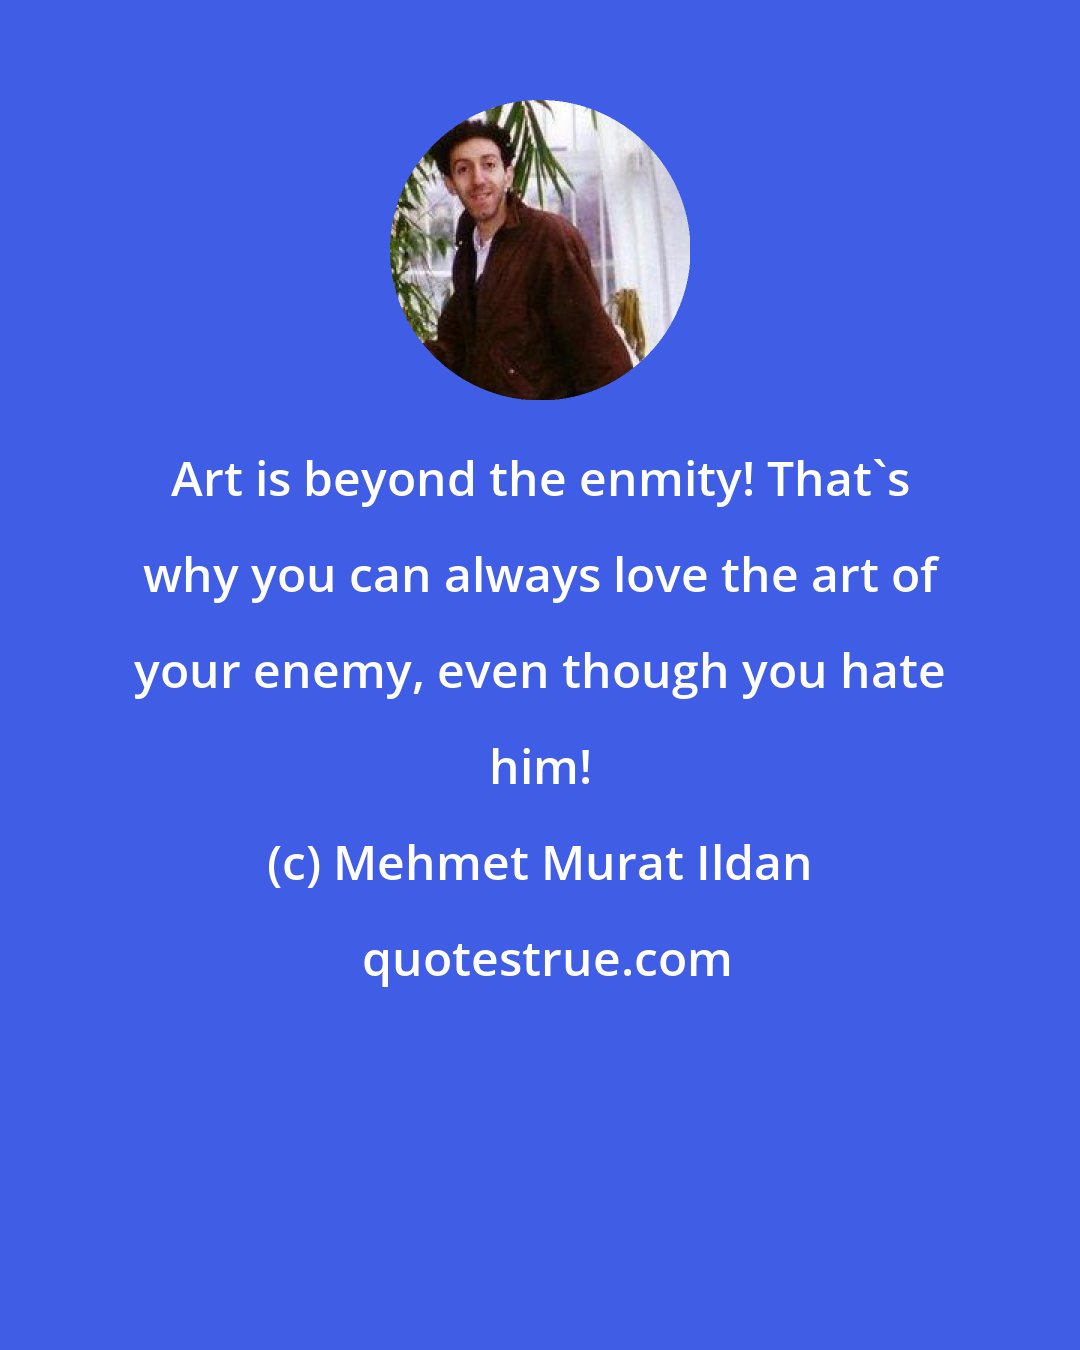 Mehmet Murat Ildan: Art is beyond the enmity! That's why you can always love the art of your enemy, even though you hate him!